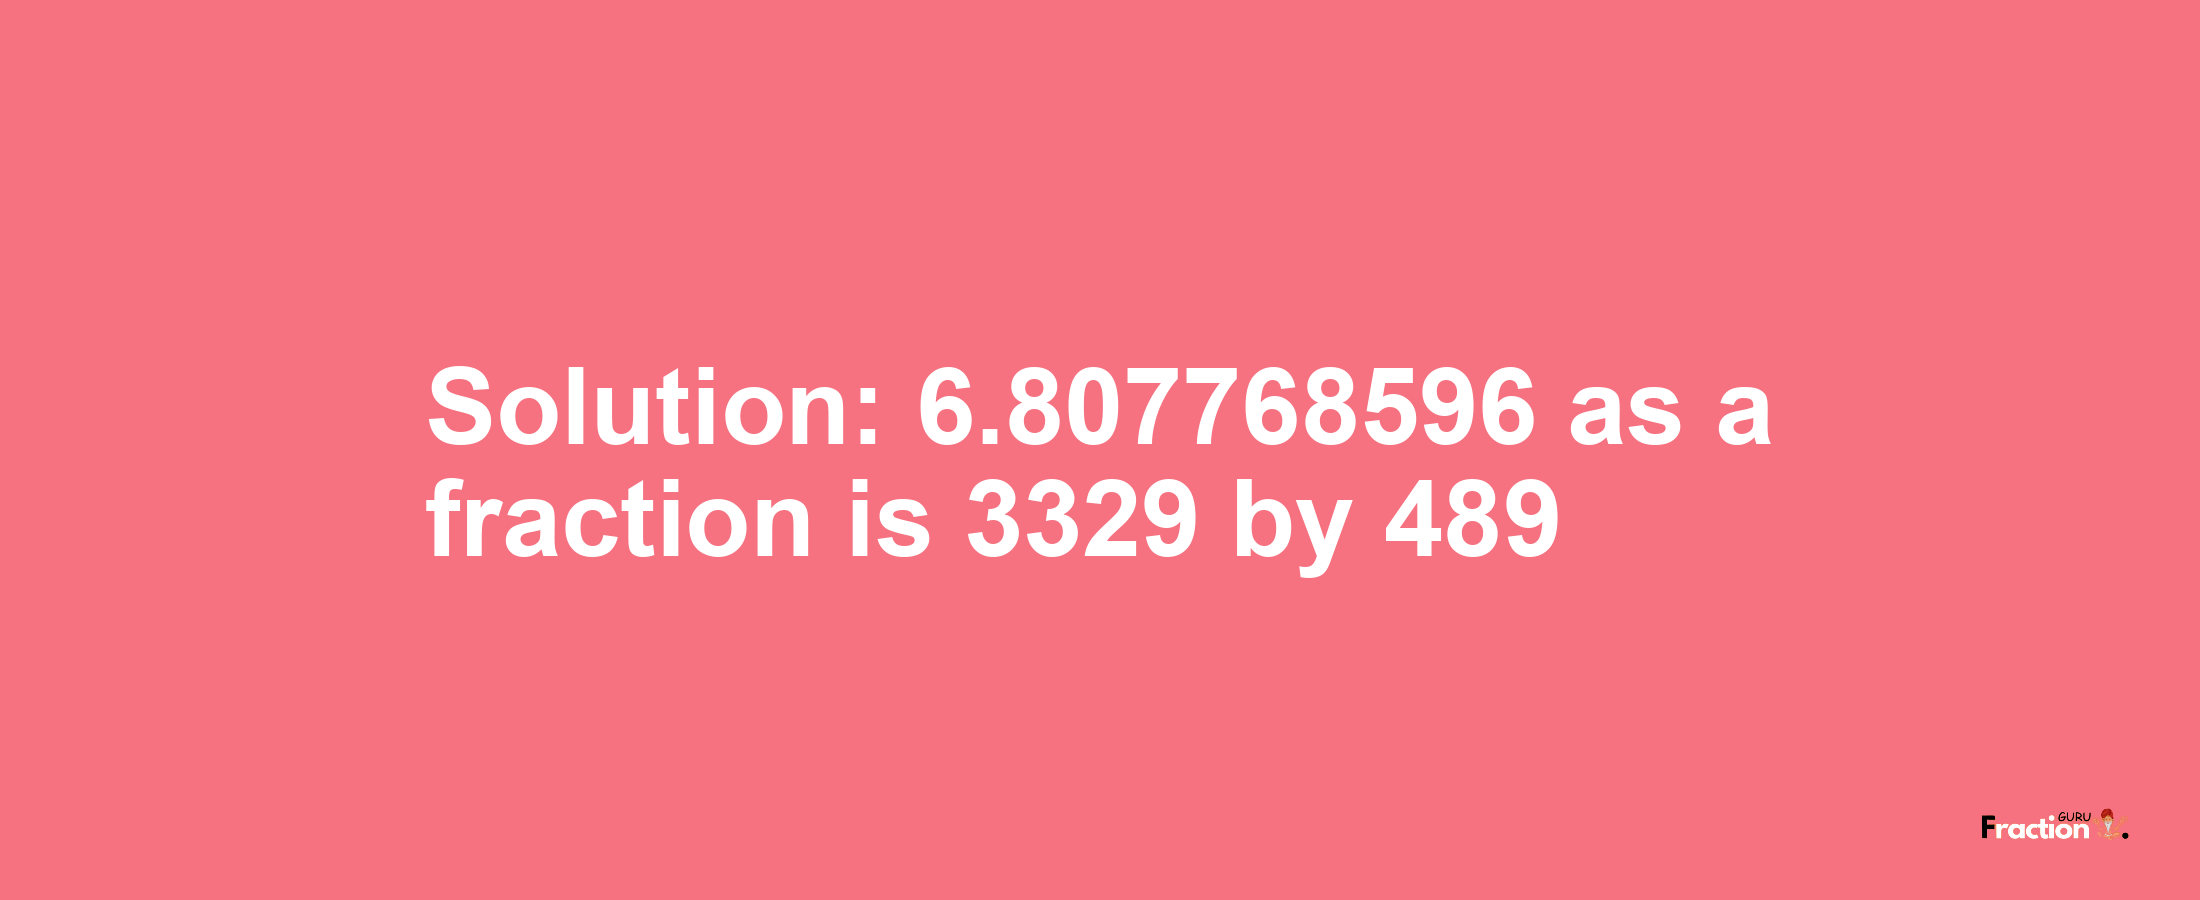 Solution:6.807768596 as a fraction is 3329/489